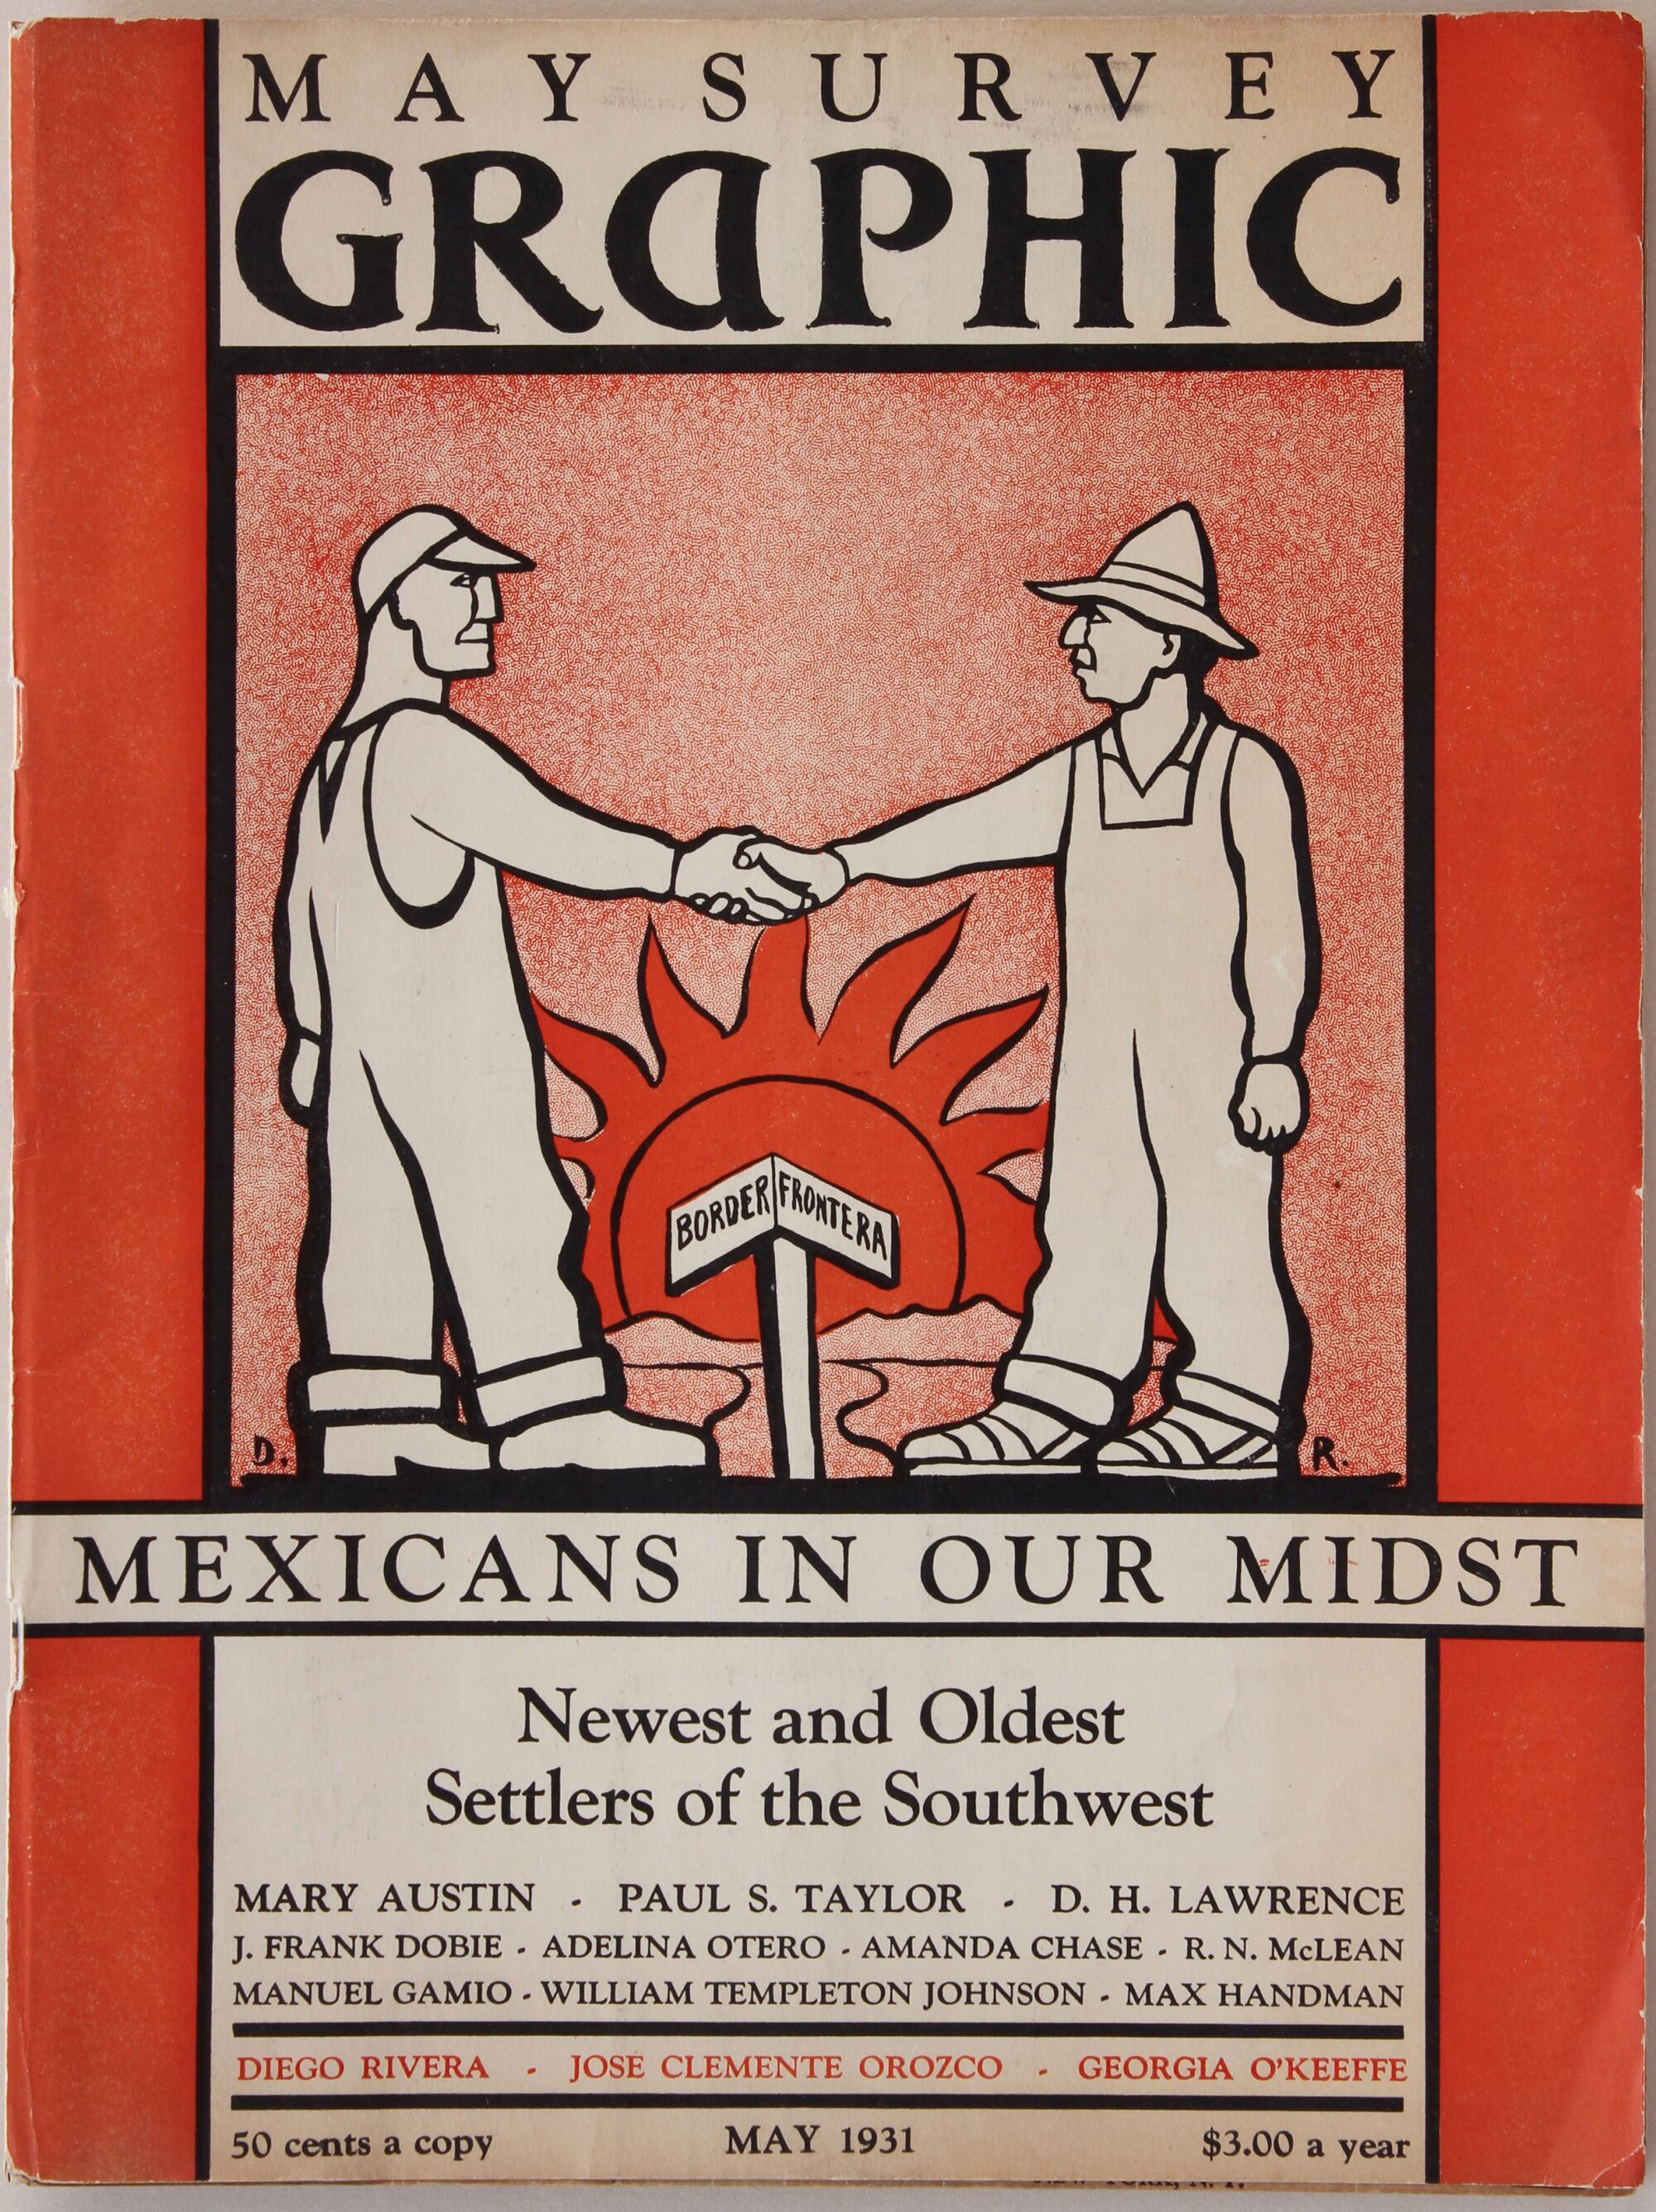 A journal cover features a graphic by Diego Rivera that shows an Anglo and Mexican worker in overalls shaking hands